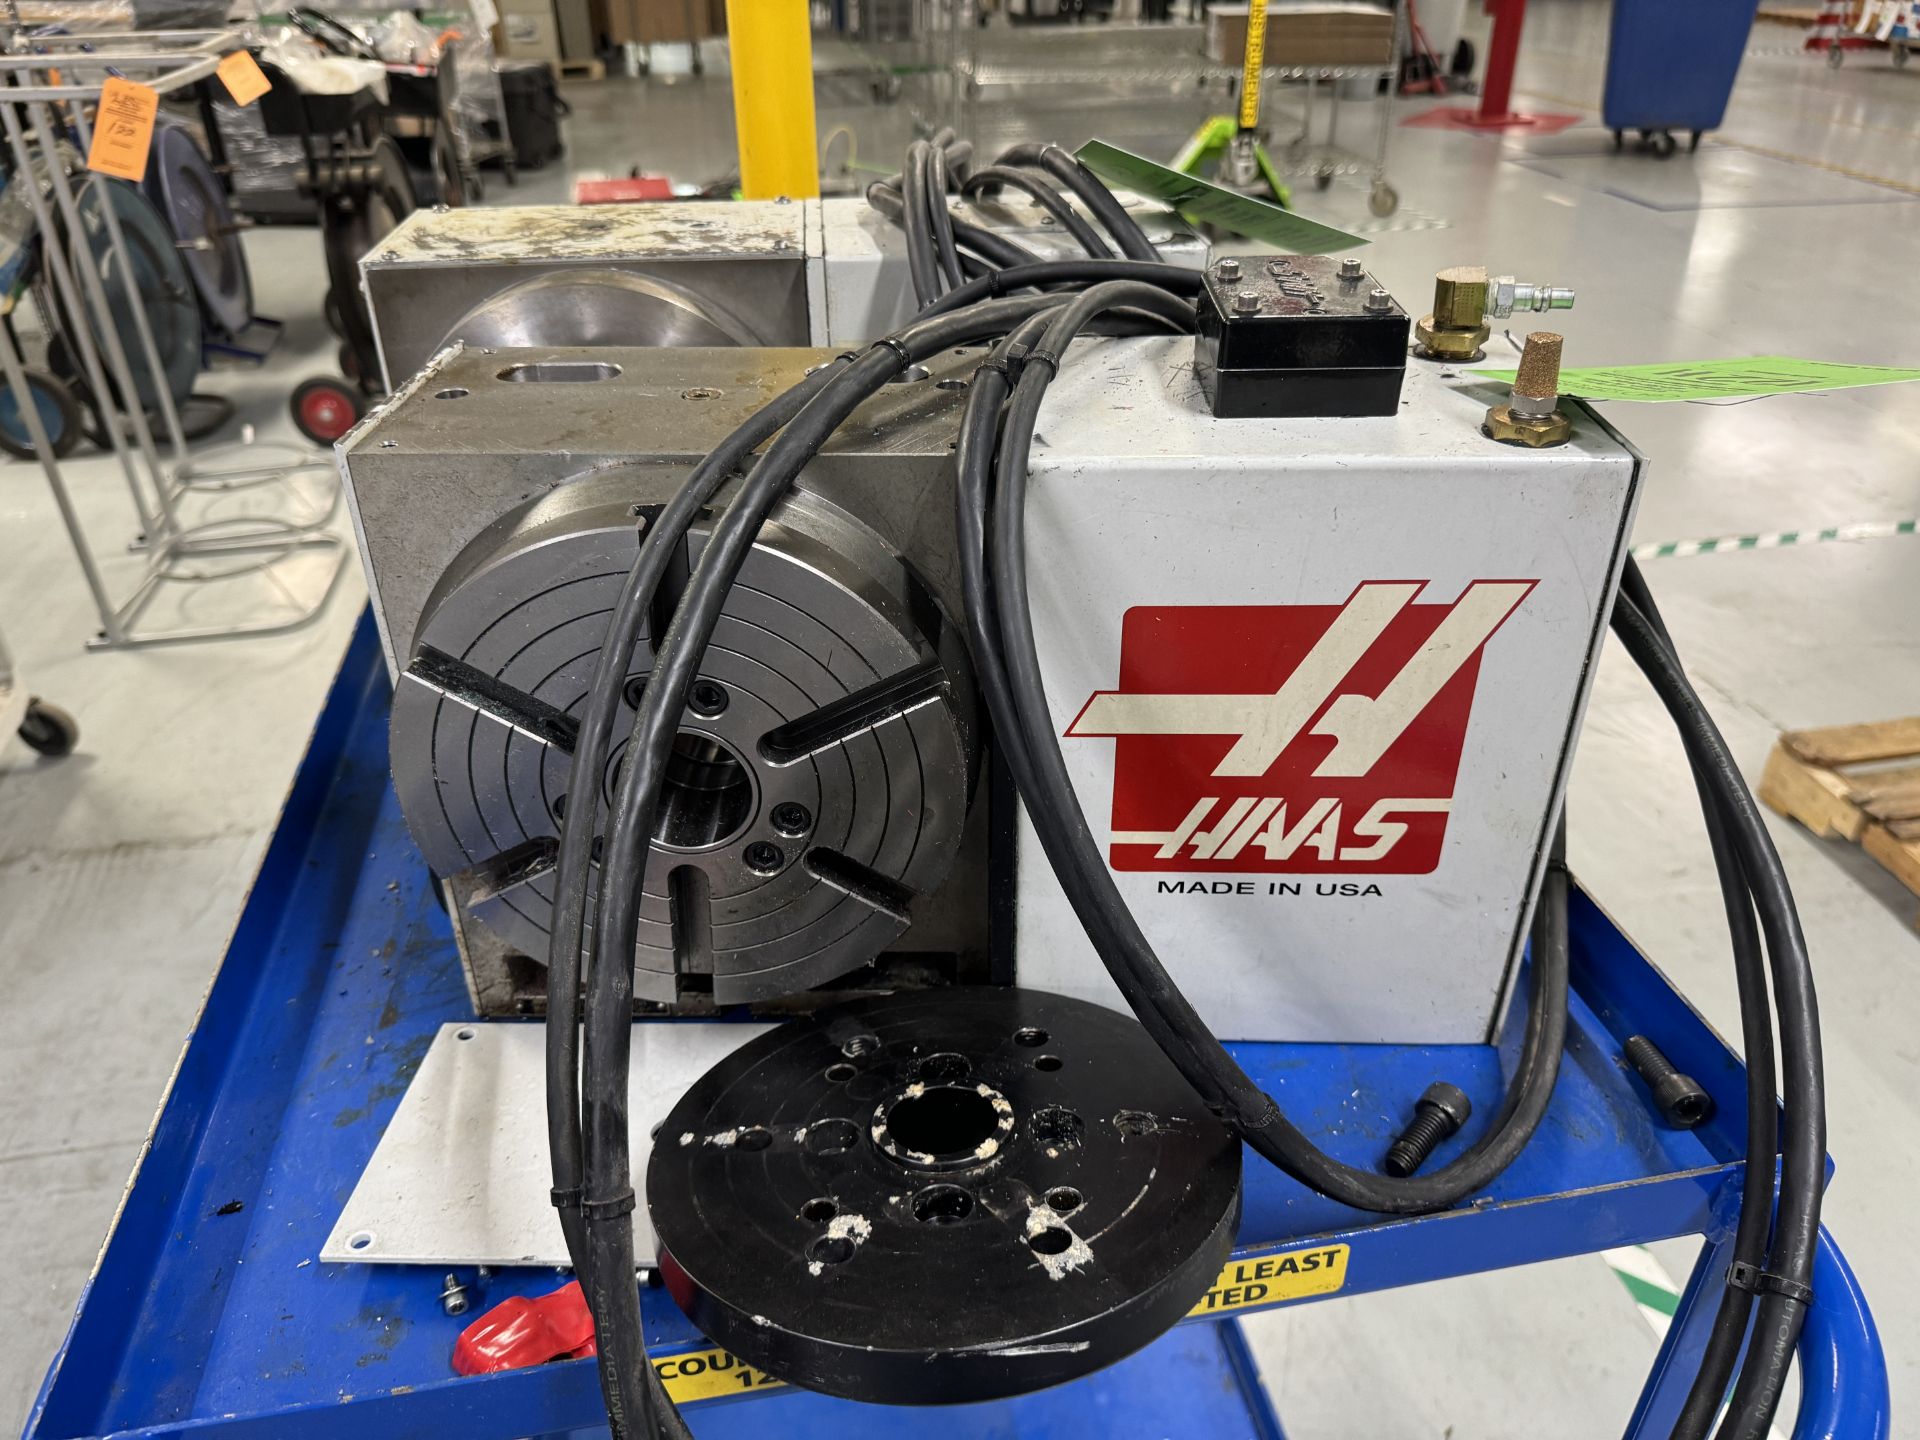 HAAS ROTARY TABLE MODEL # HBT210H SERIAL # 219350